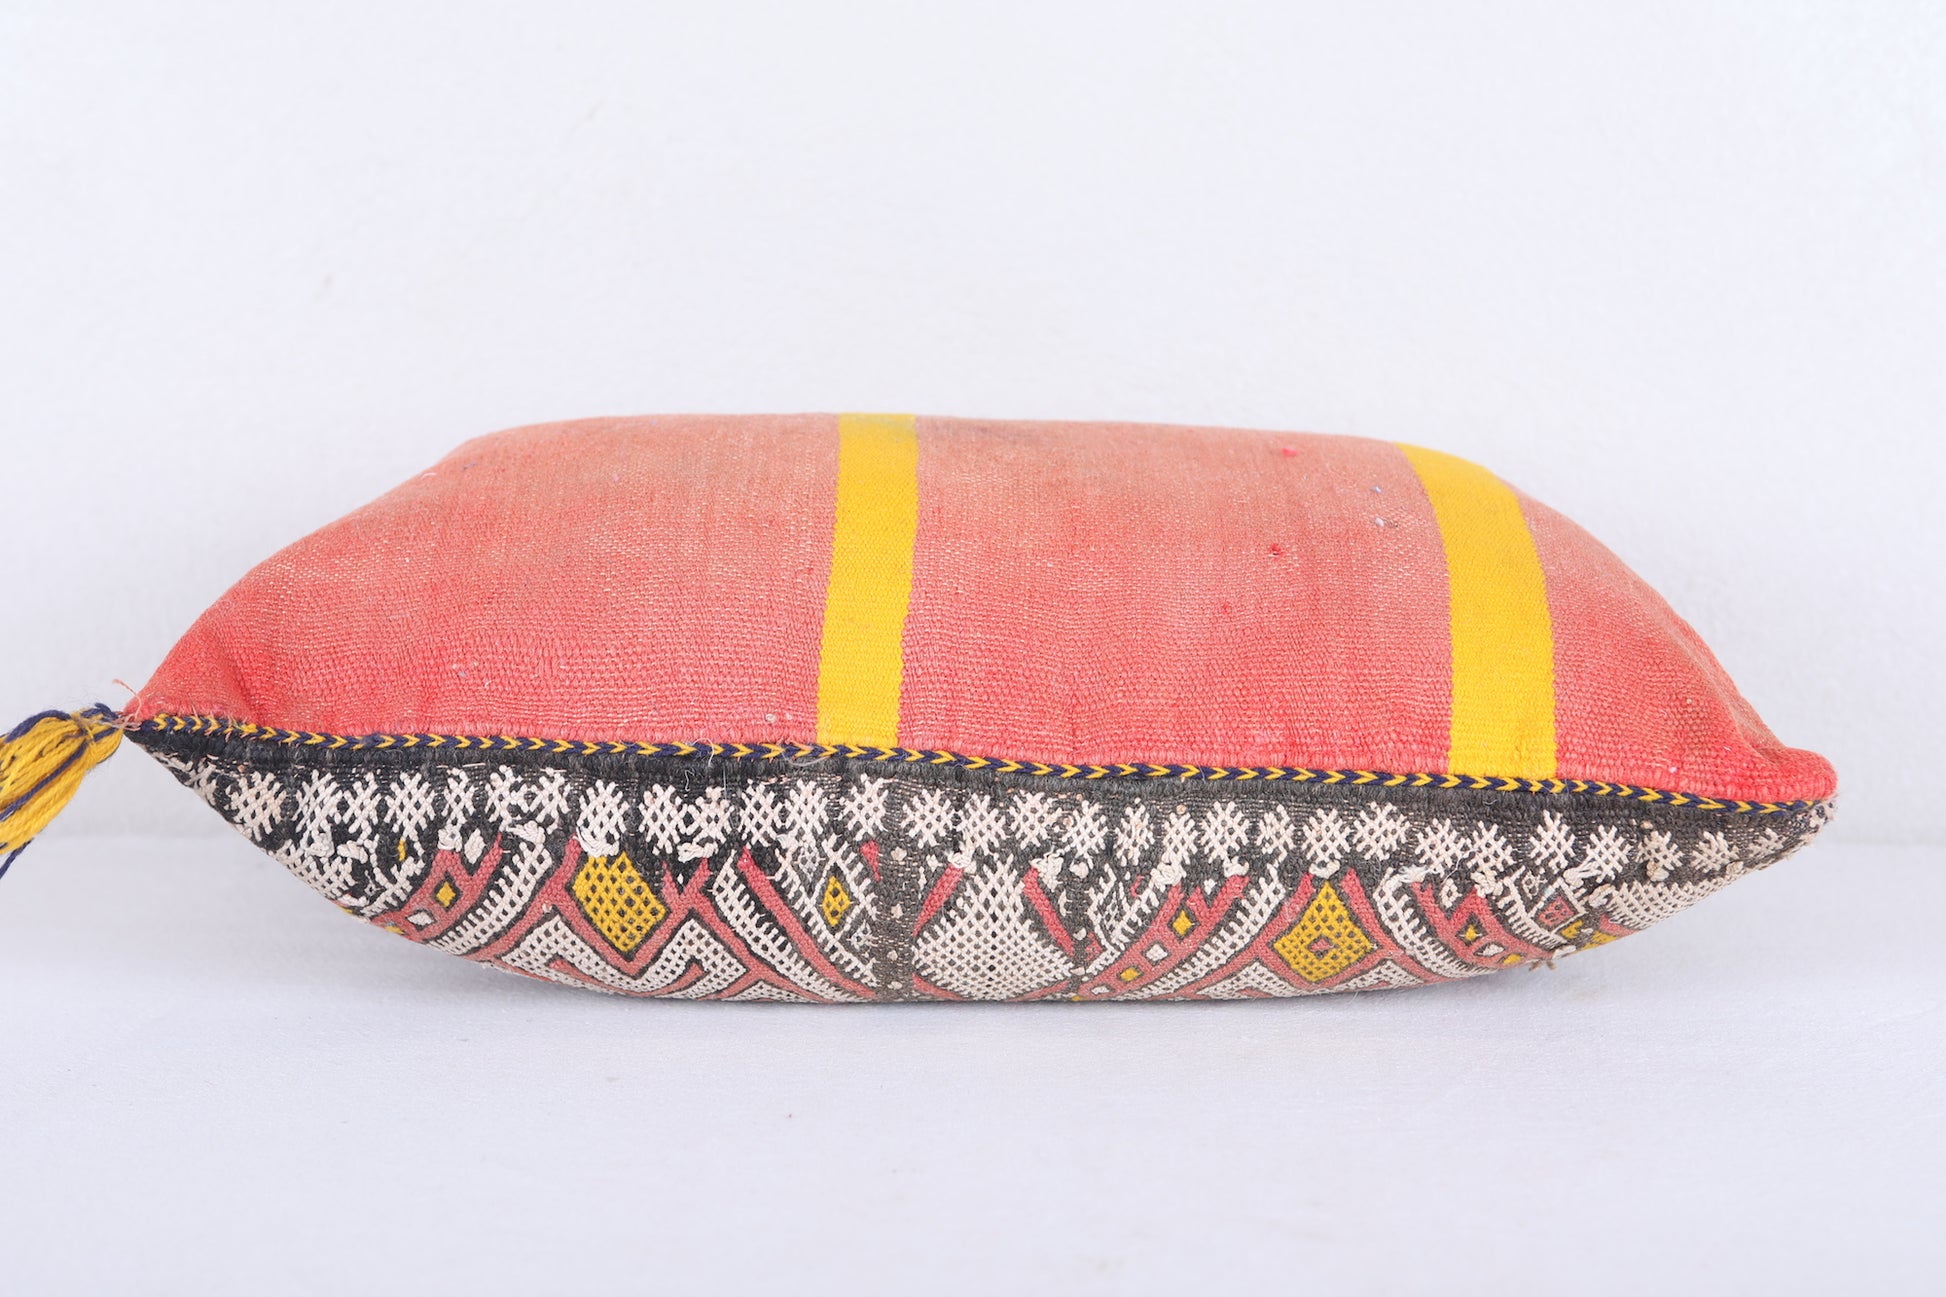 Vintage handmade moroccan kilim pillow 14.9 INCHES X 20.4 INCHES